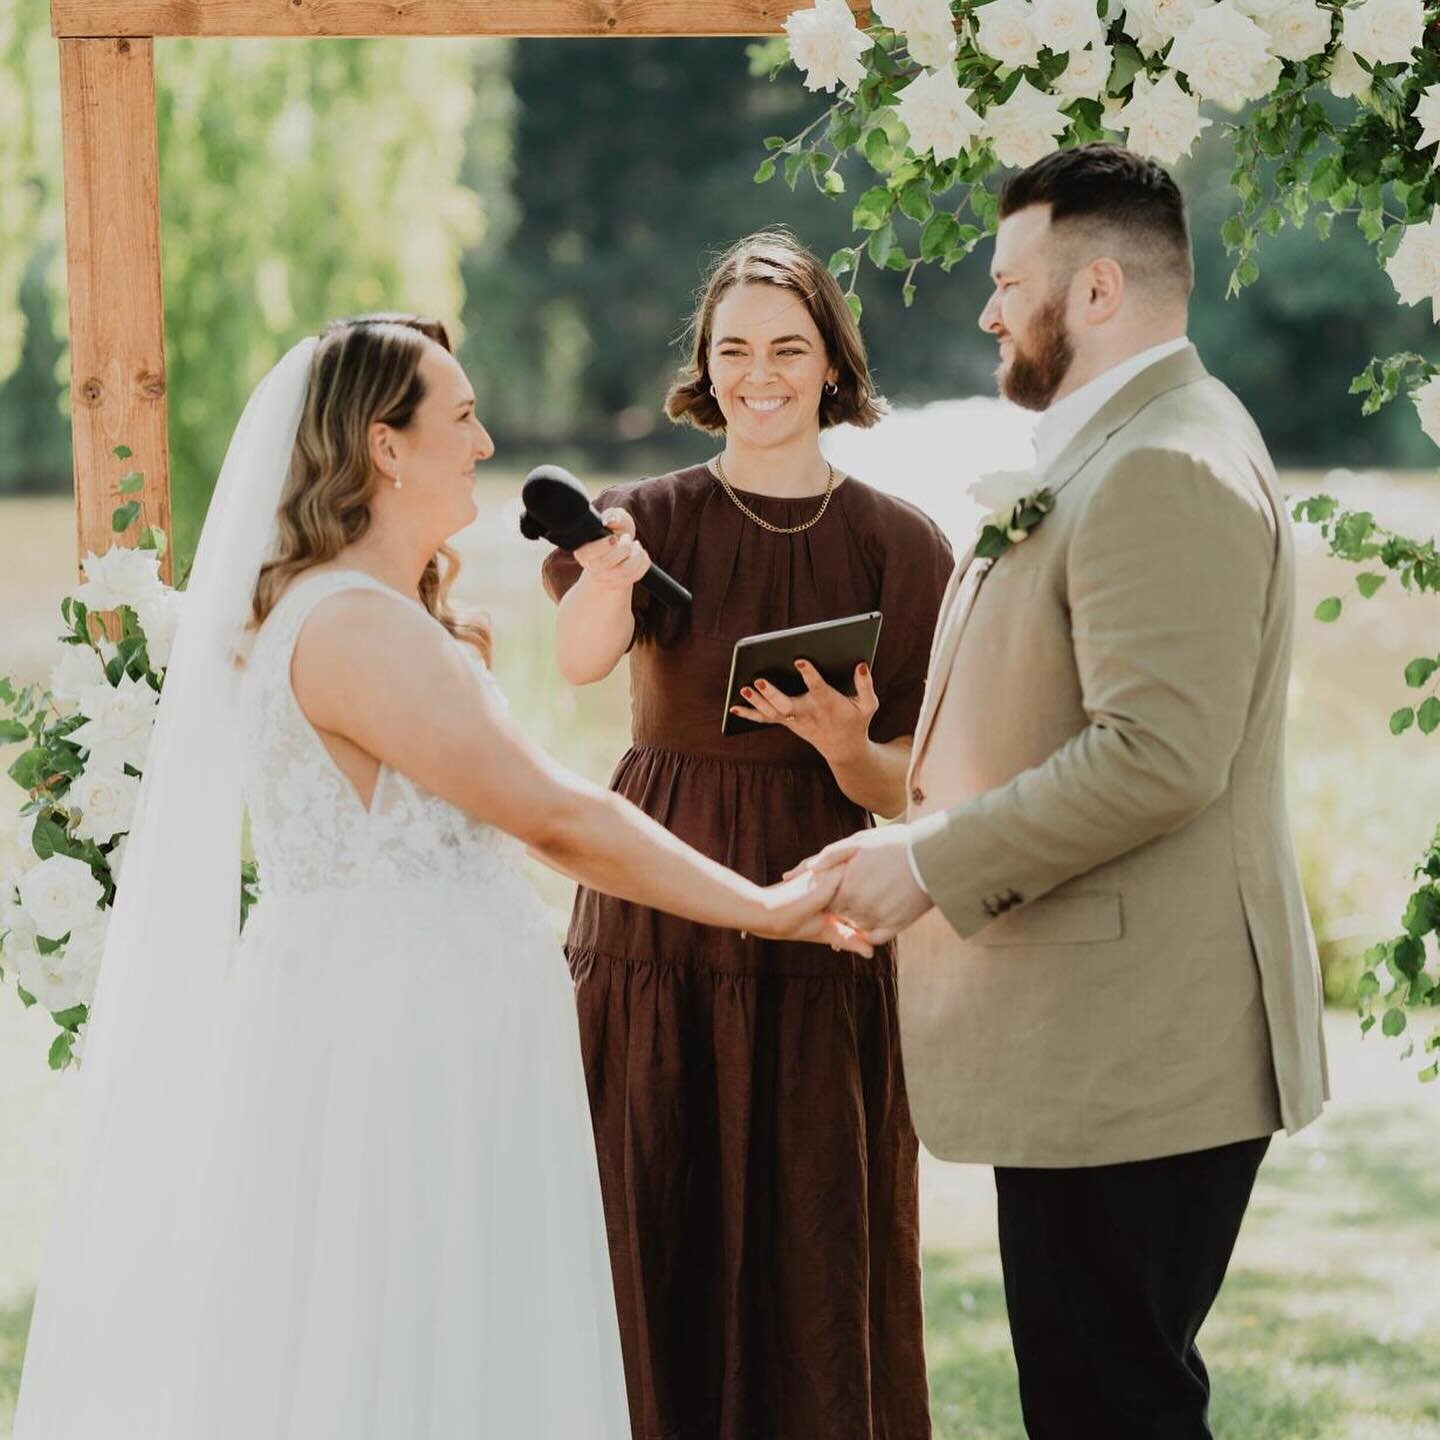 Maddie and Tommy&rsquo;s ceremony was 50% giggles, 50% happy tears. Look at the grins on this pair. Utter joy.

When deciding who was to say their vows first, they opted for a coin toss (pictured), which was slightly rigged&hellip; &ldquo;Heads, Madd